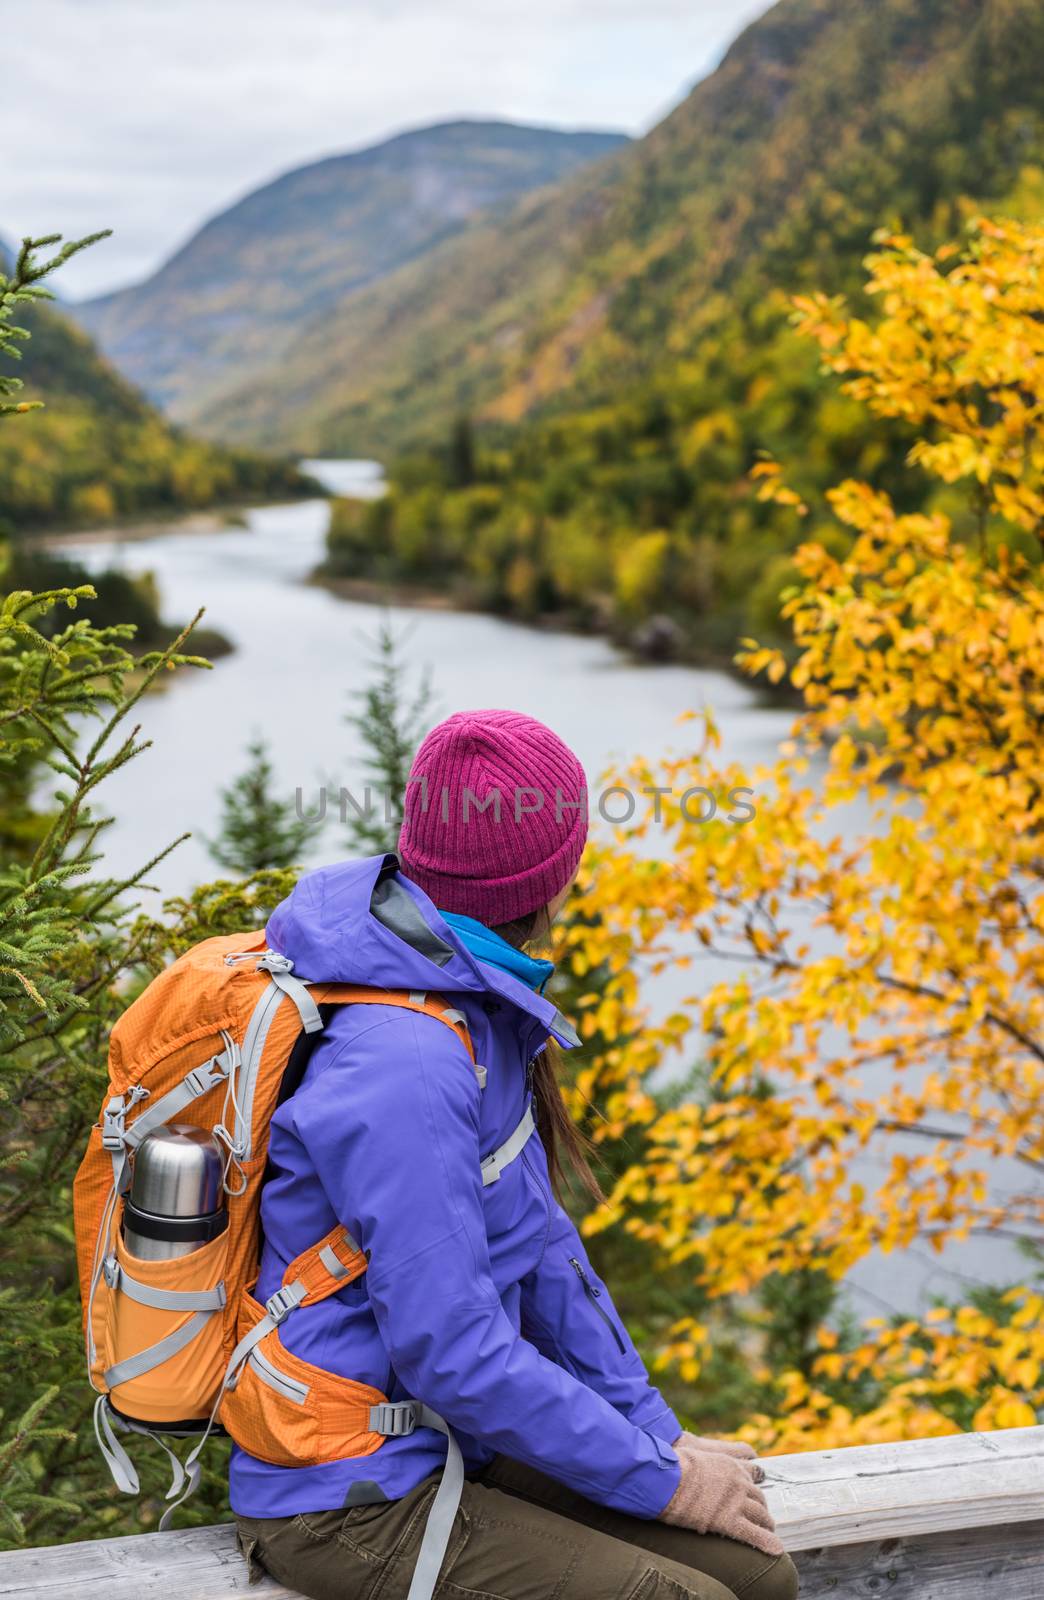 Woman hiker hiking looking at scenic view of fall foliage mountain landscape . Adventure travel outdoors person standing relaxing near river during nature hike in autumn season.